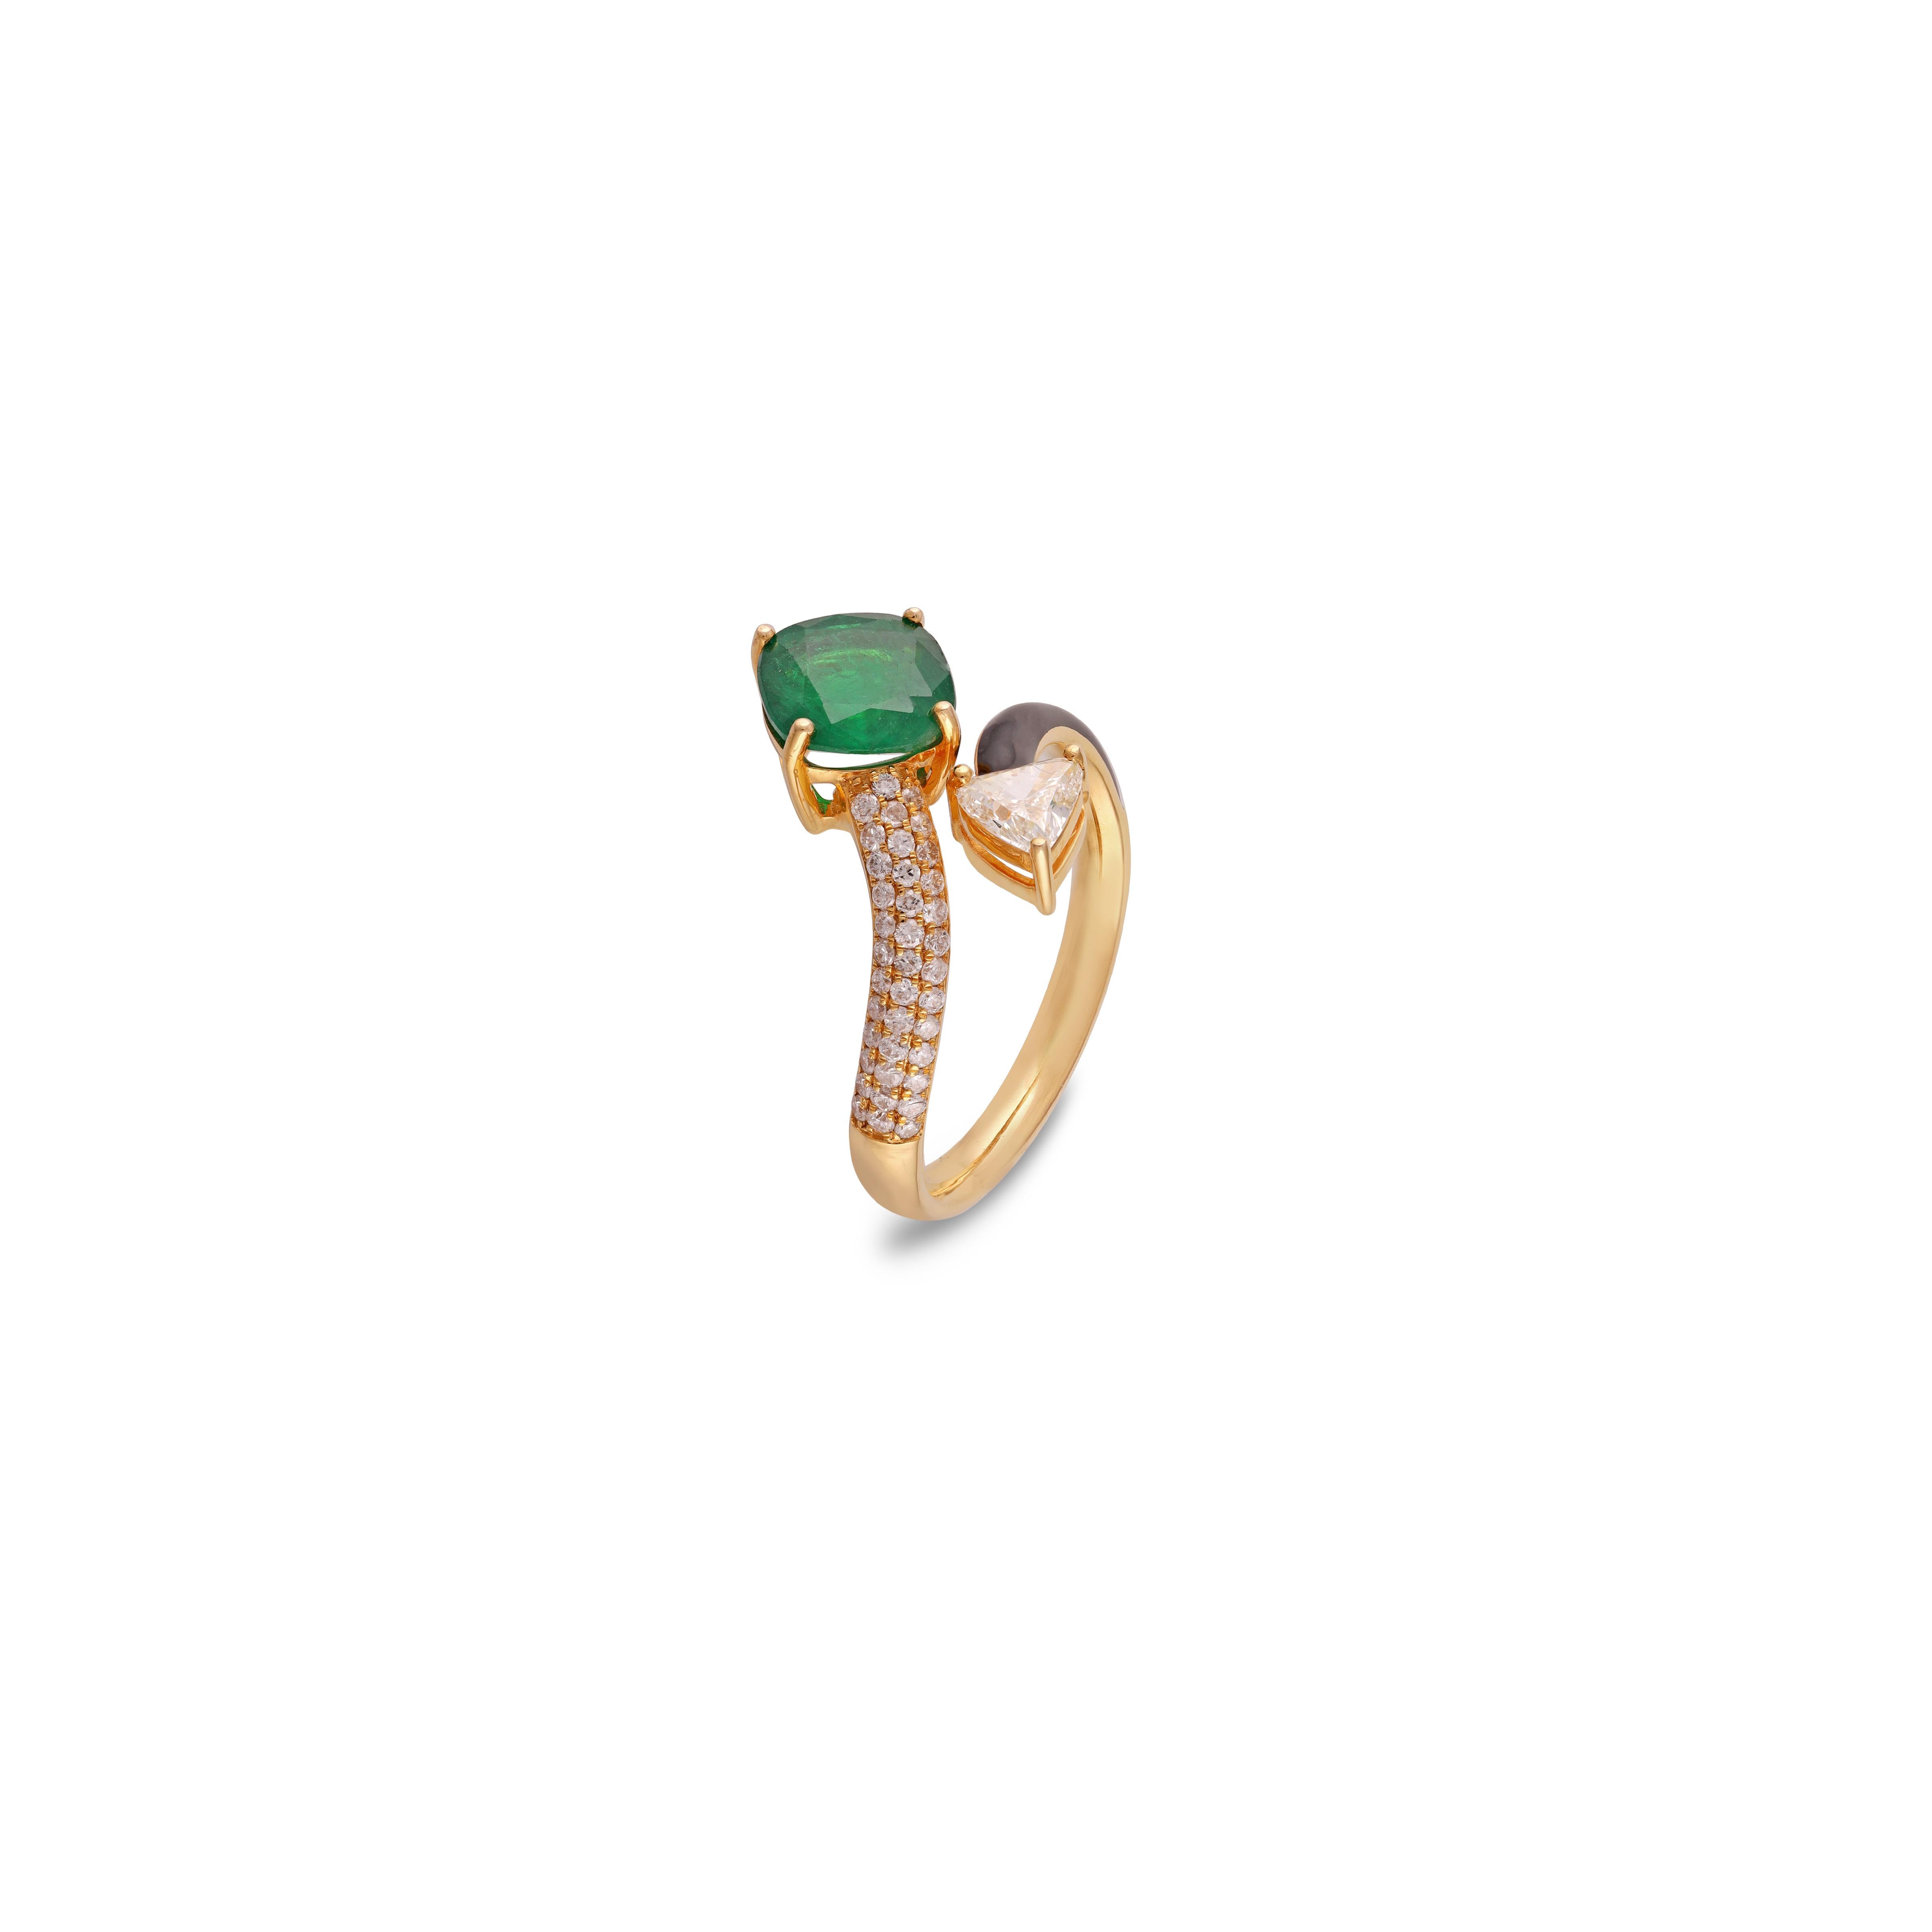 Mixed Cut 1.45 Carat Clear Zambian Emerald & Diamond Ring with Enamel & 18K Gold For Sale